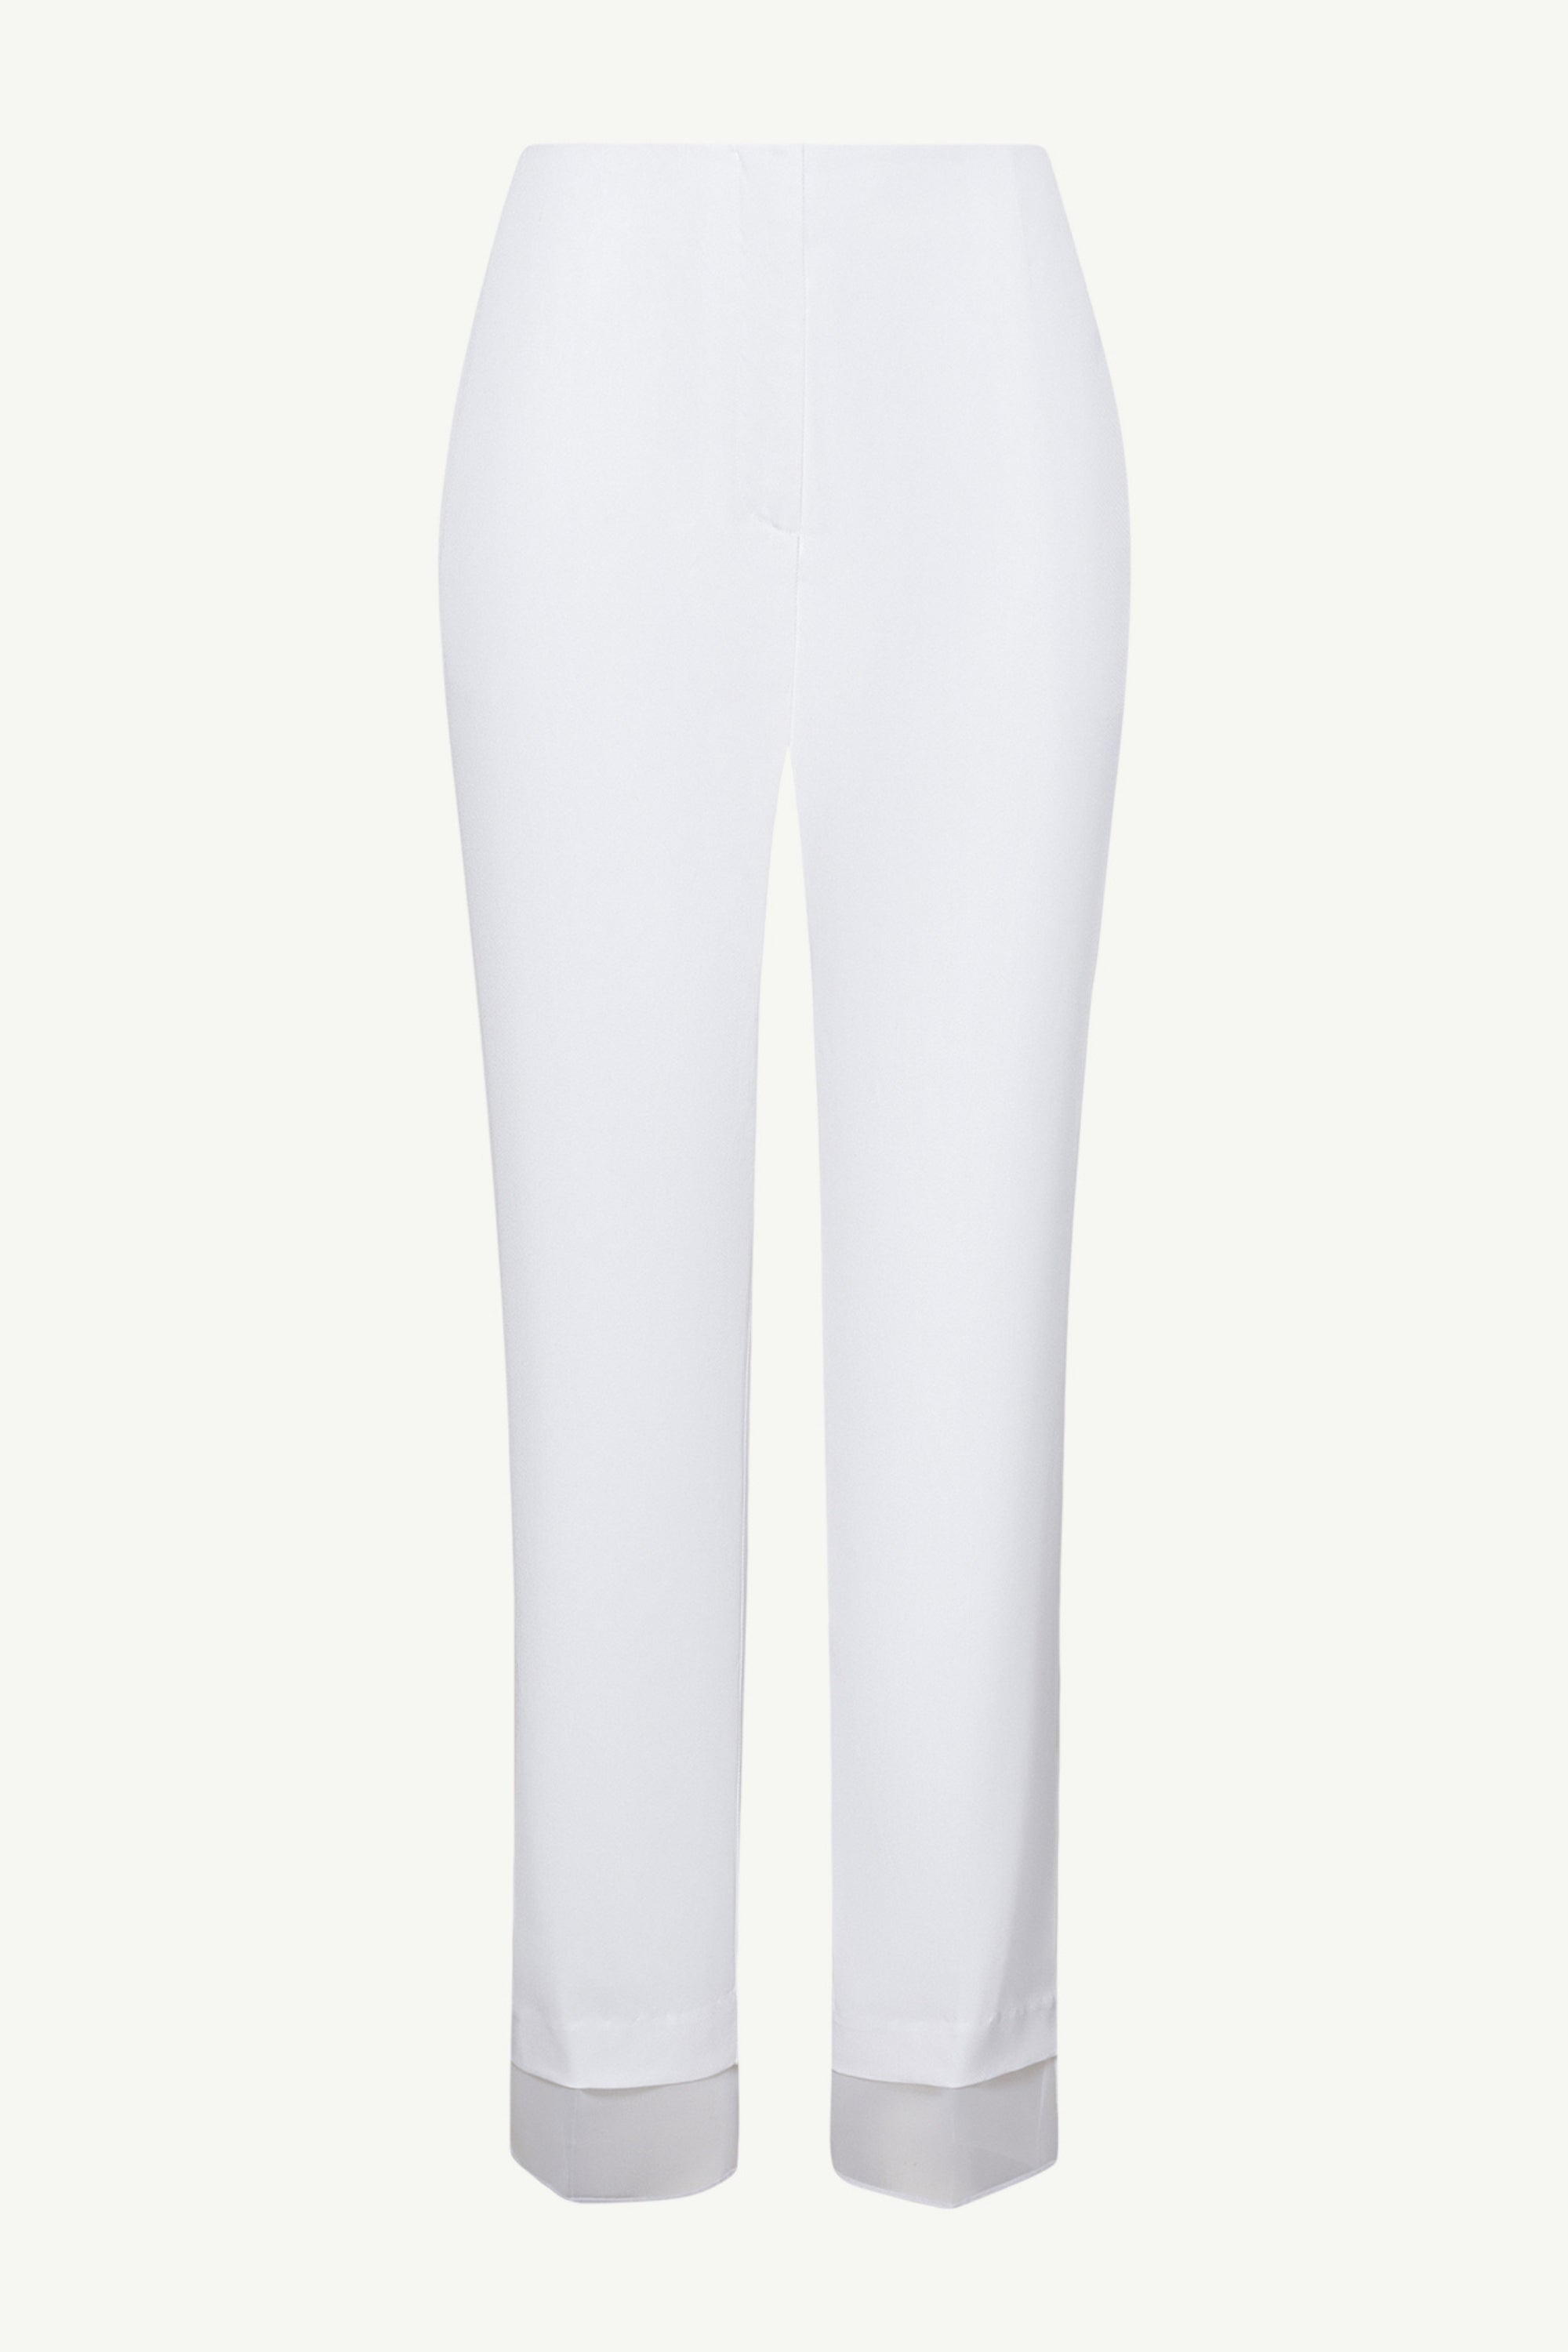 Rayan Organza Trim Trousers - White Clothing epschoolboard 